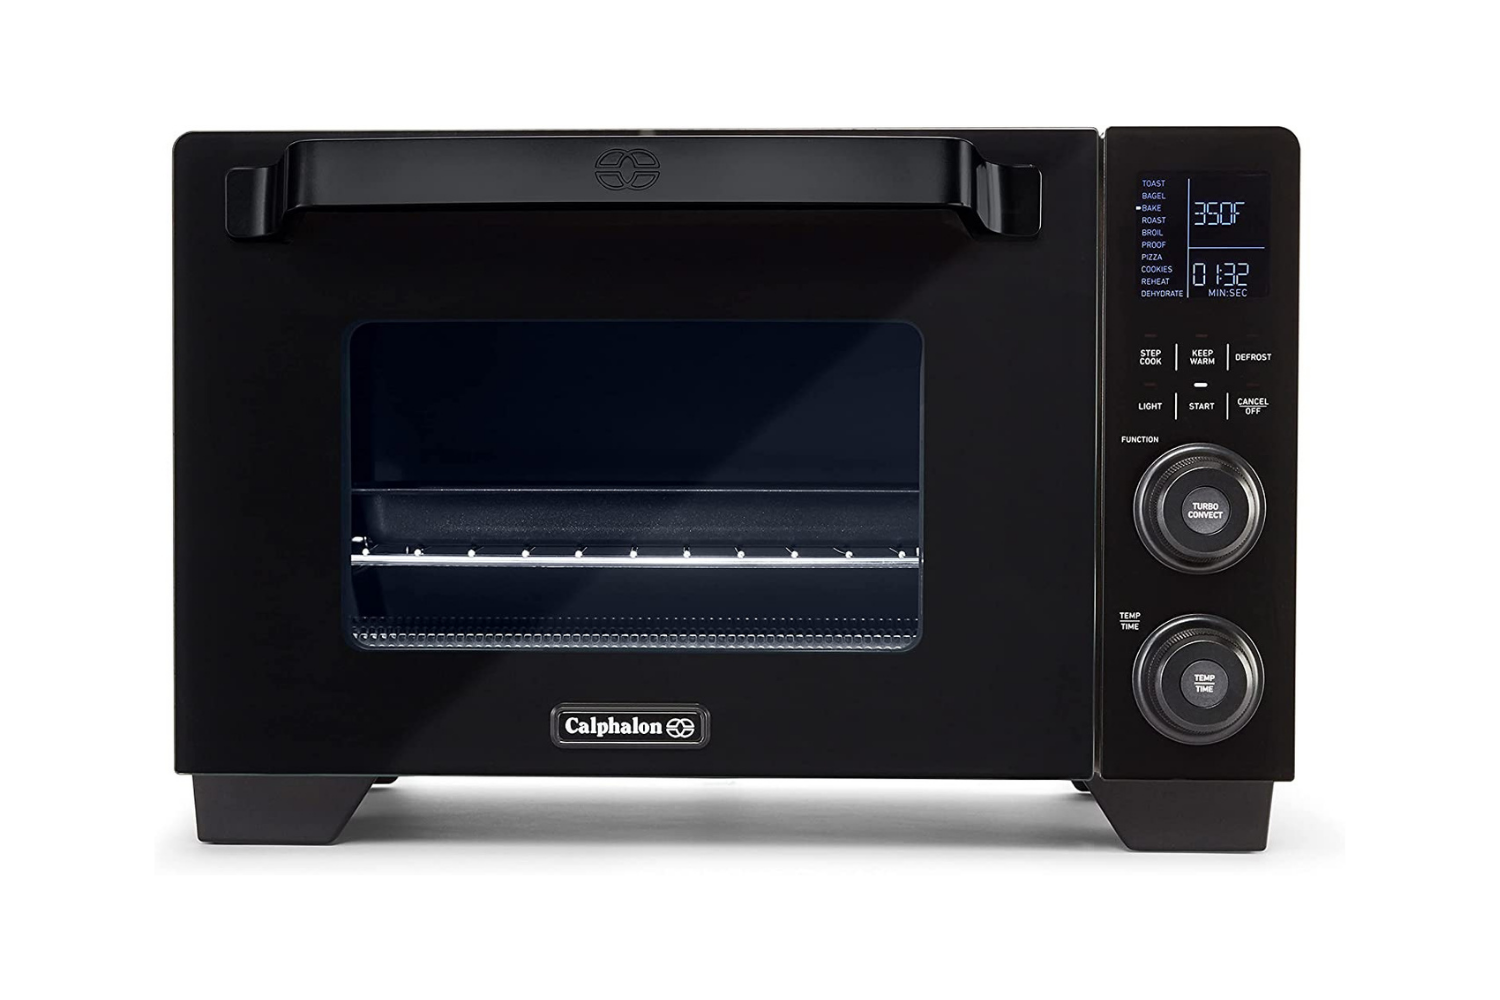 Calphalon Cool Touch Toaster Oven